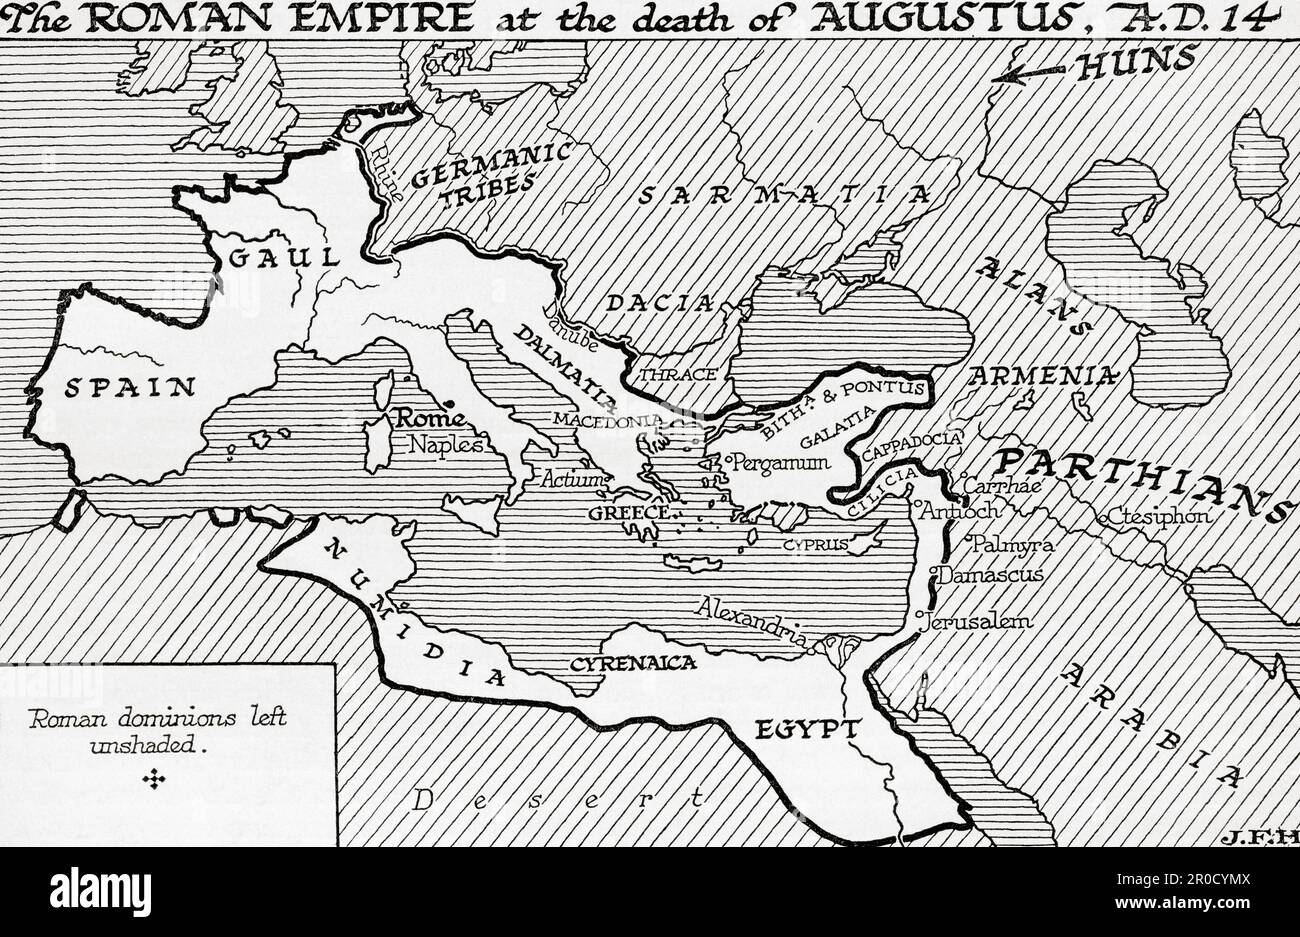 Map of the Roman Empire at the death of Caesar Augustus, AD14.  From the book Outline of History by H.G. Wells, published 1920. Stock Photo